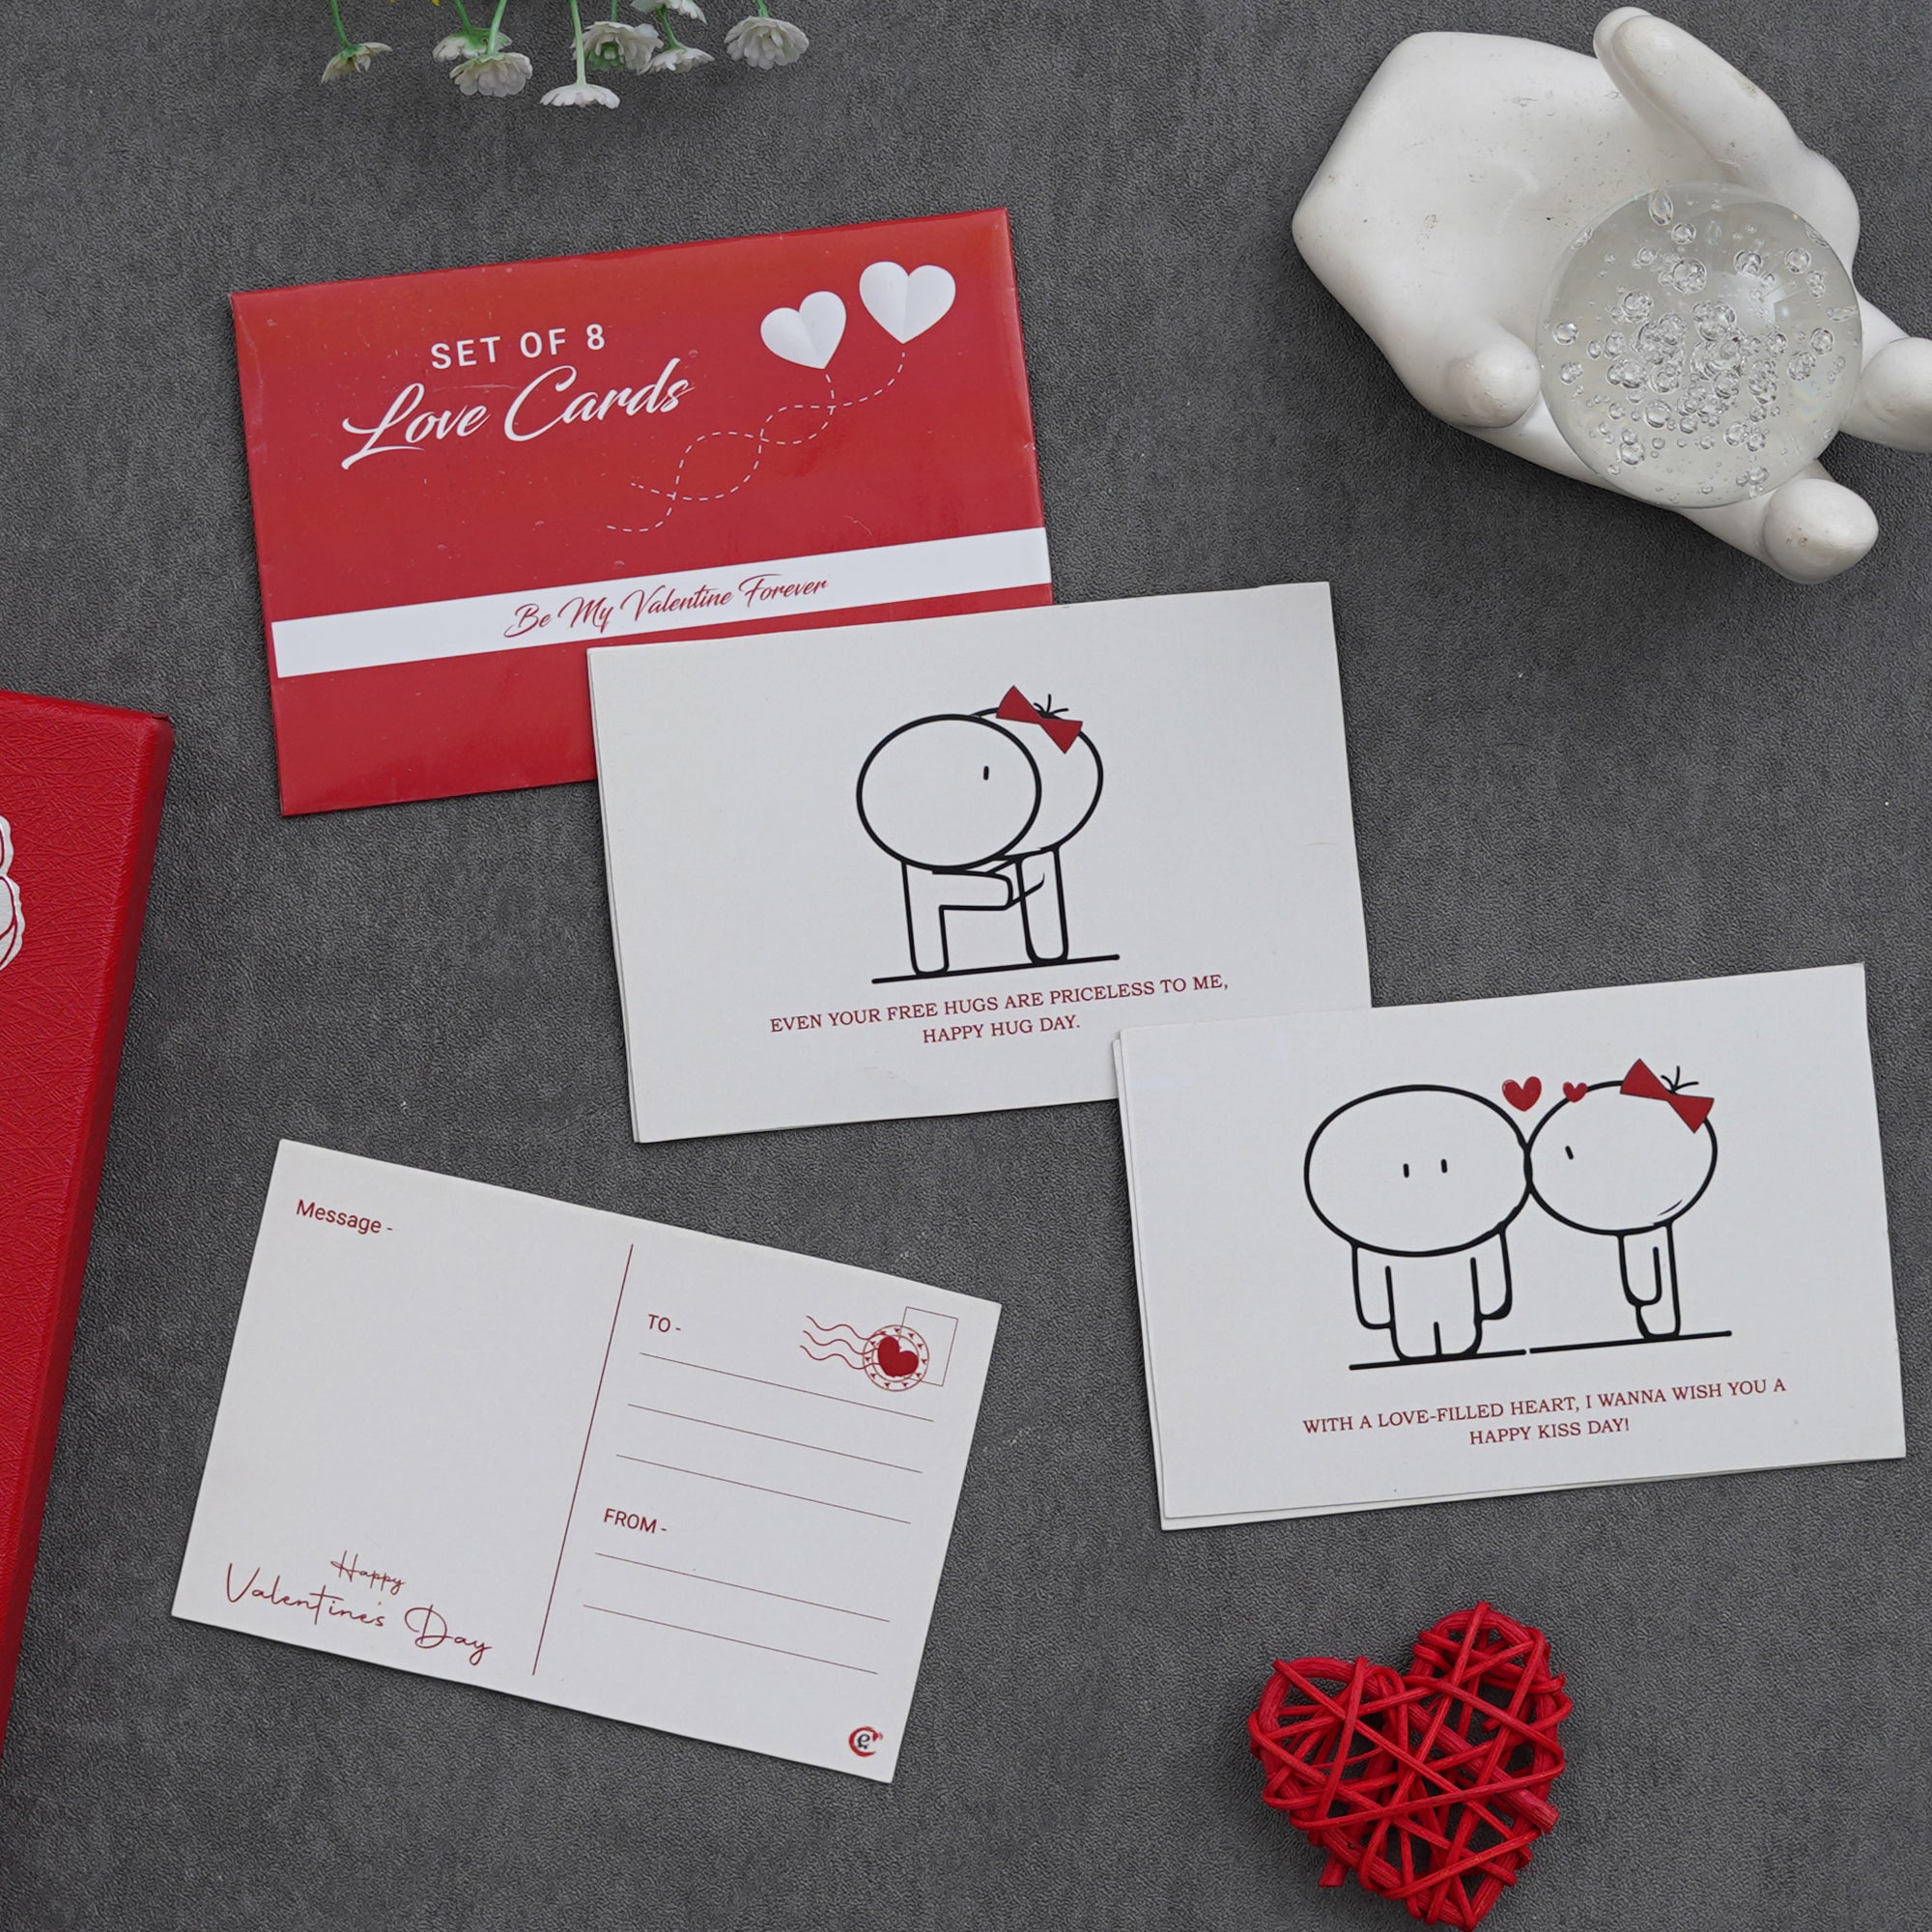 Valentine Combo of Set of 8 Love Post Cards Gift Cards Set, Red and White Heart Hugging Each Other Gift Set, Red Roses Bouquet and White, Red Teddy Bear Valentine's Rectangle Shaped Gift Box 1